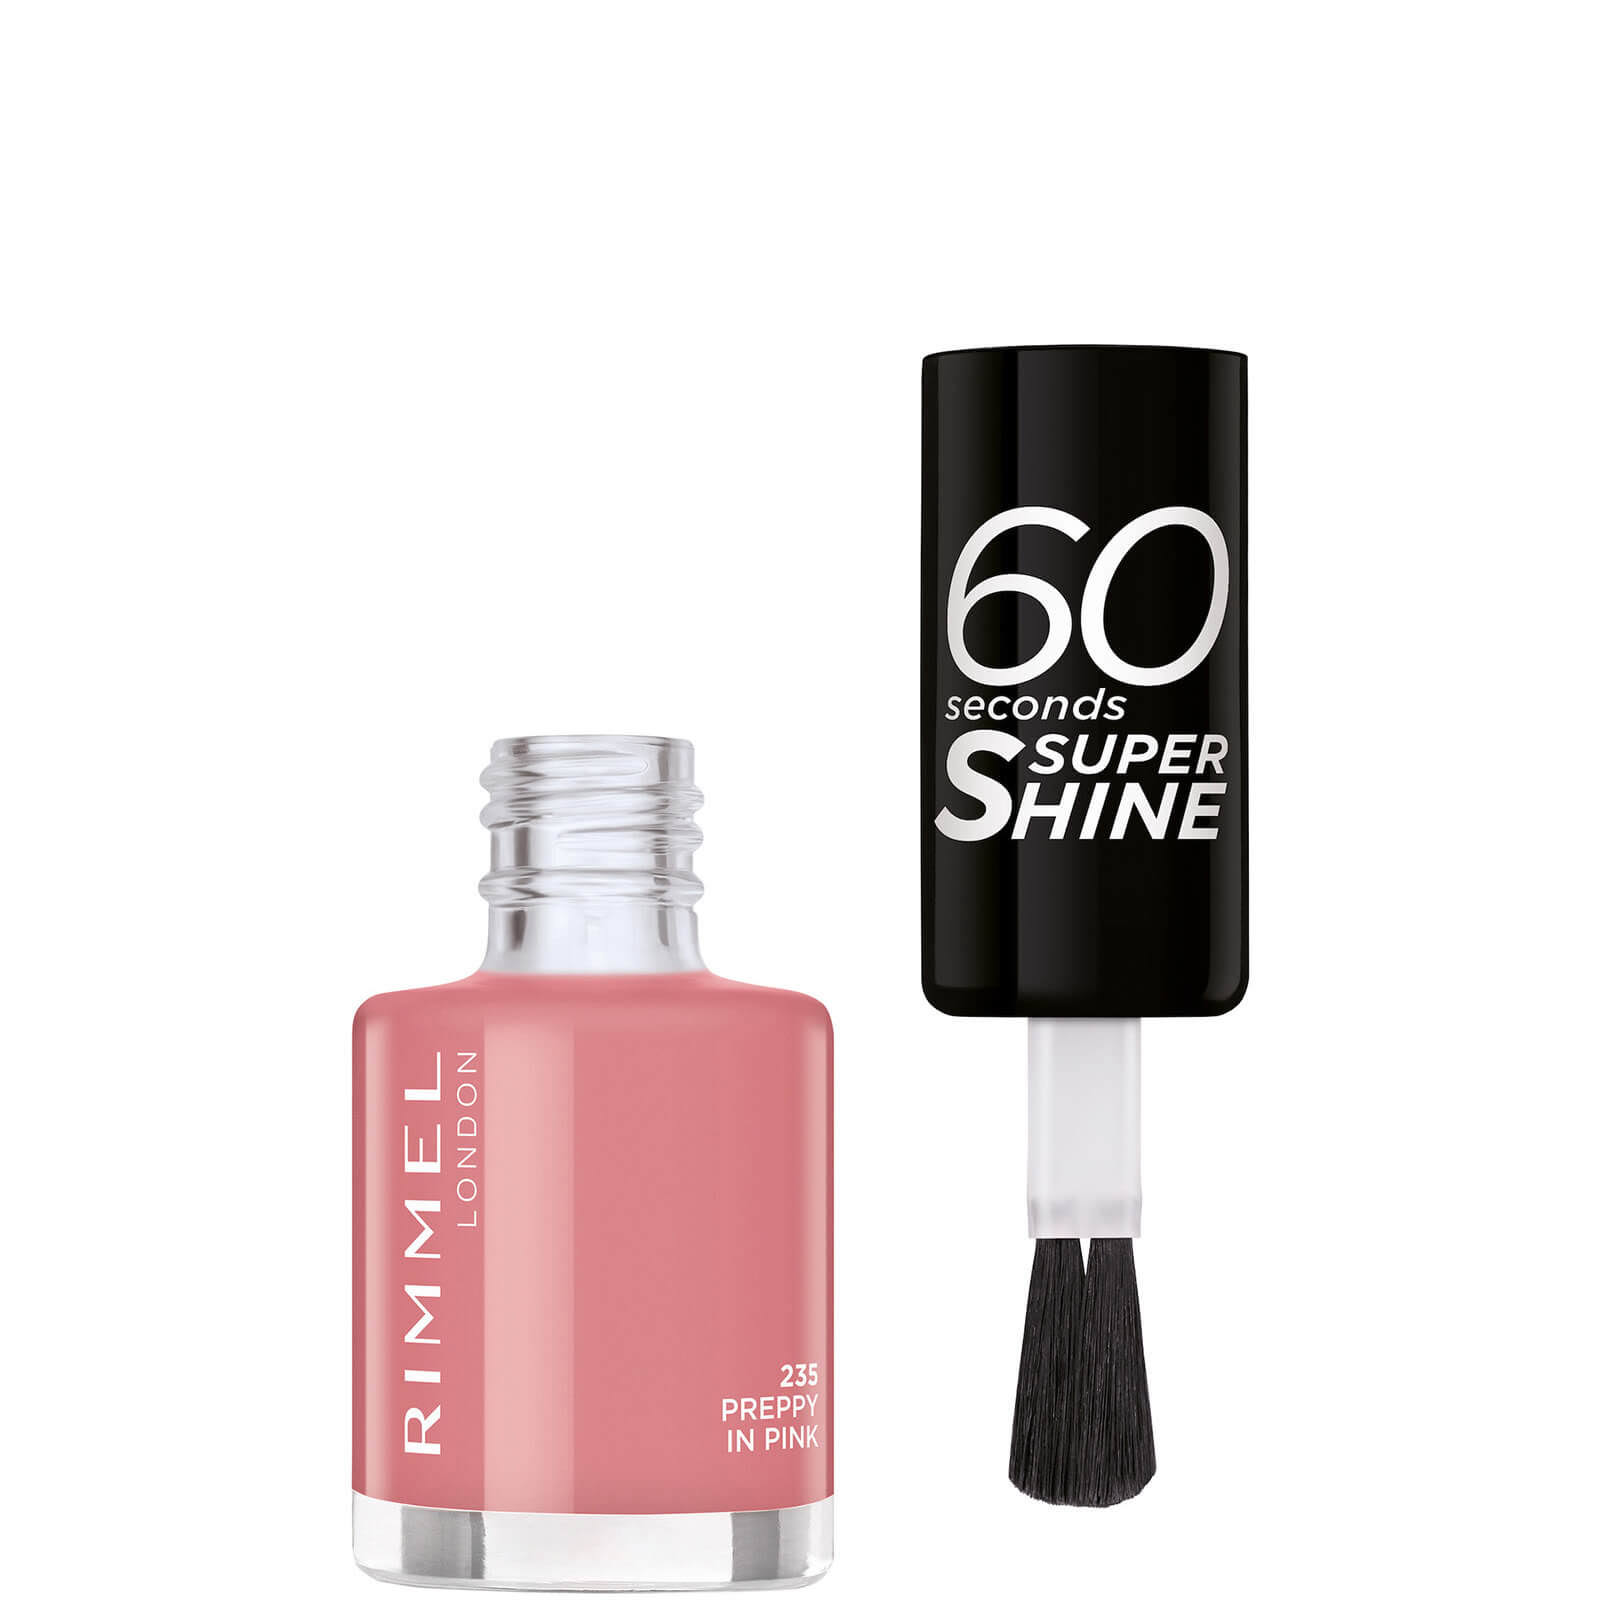 Rimmel 60 Seconds Nail Polish 8ml (Various Shades) - Preppy in Pink